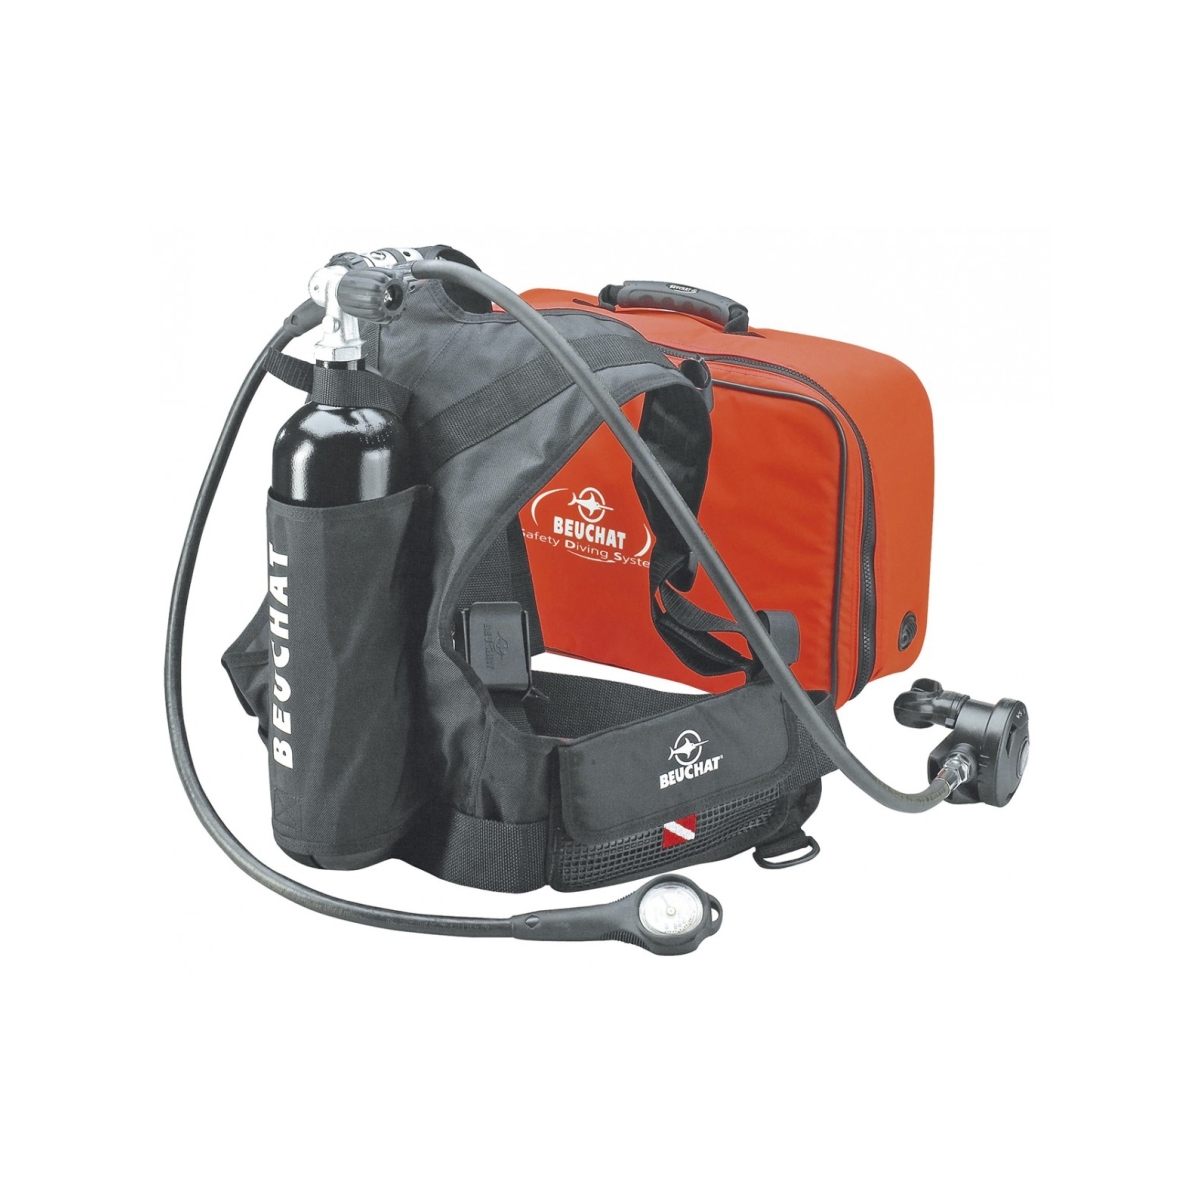 BEUCHAT EMERGENCY DIVING KIT